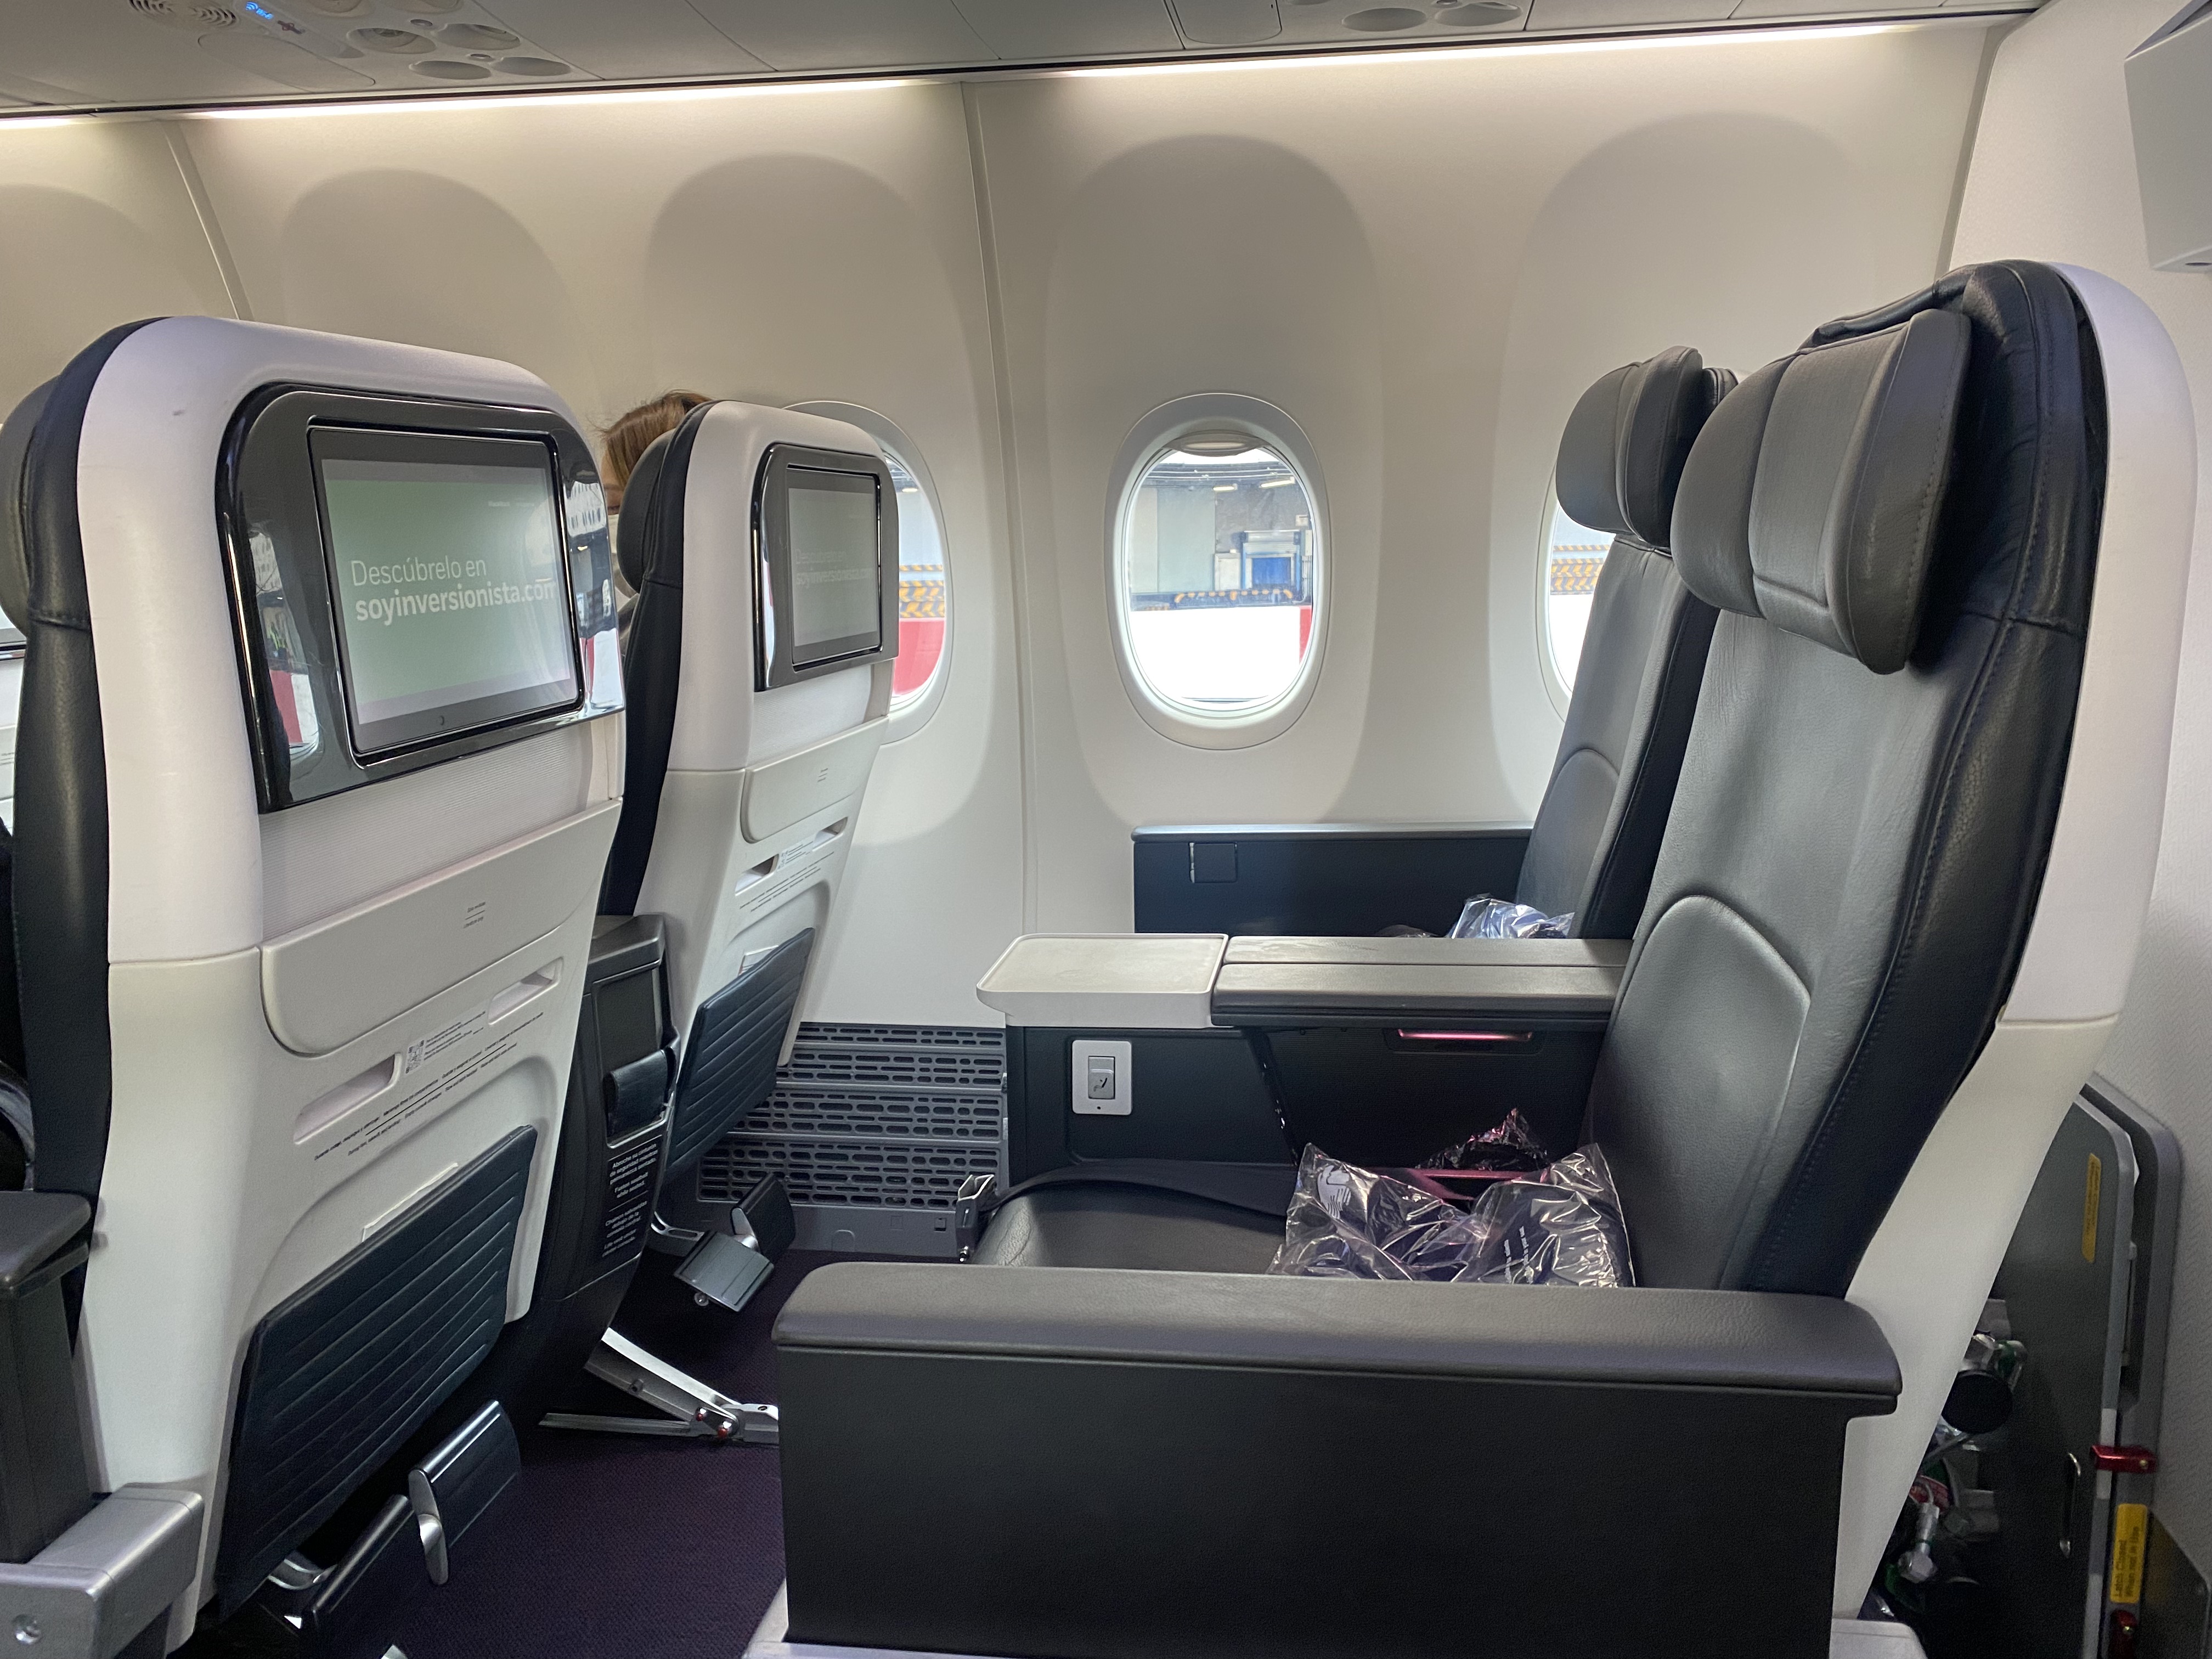 Aeromexico Clase Premier first class airline seating on the Boeing 737-8 MAX.